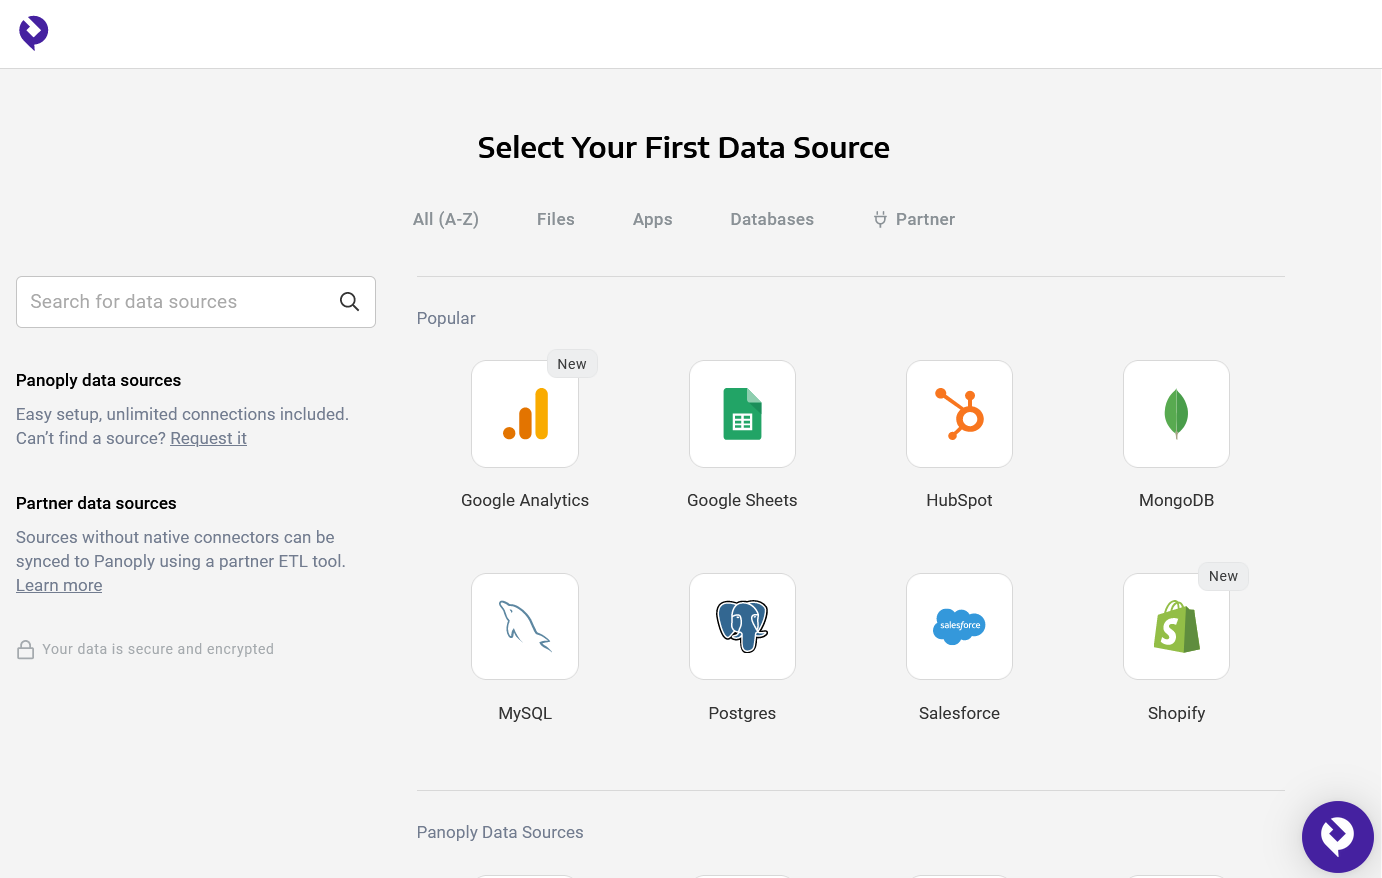 Merge your data with other sources